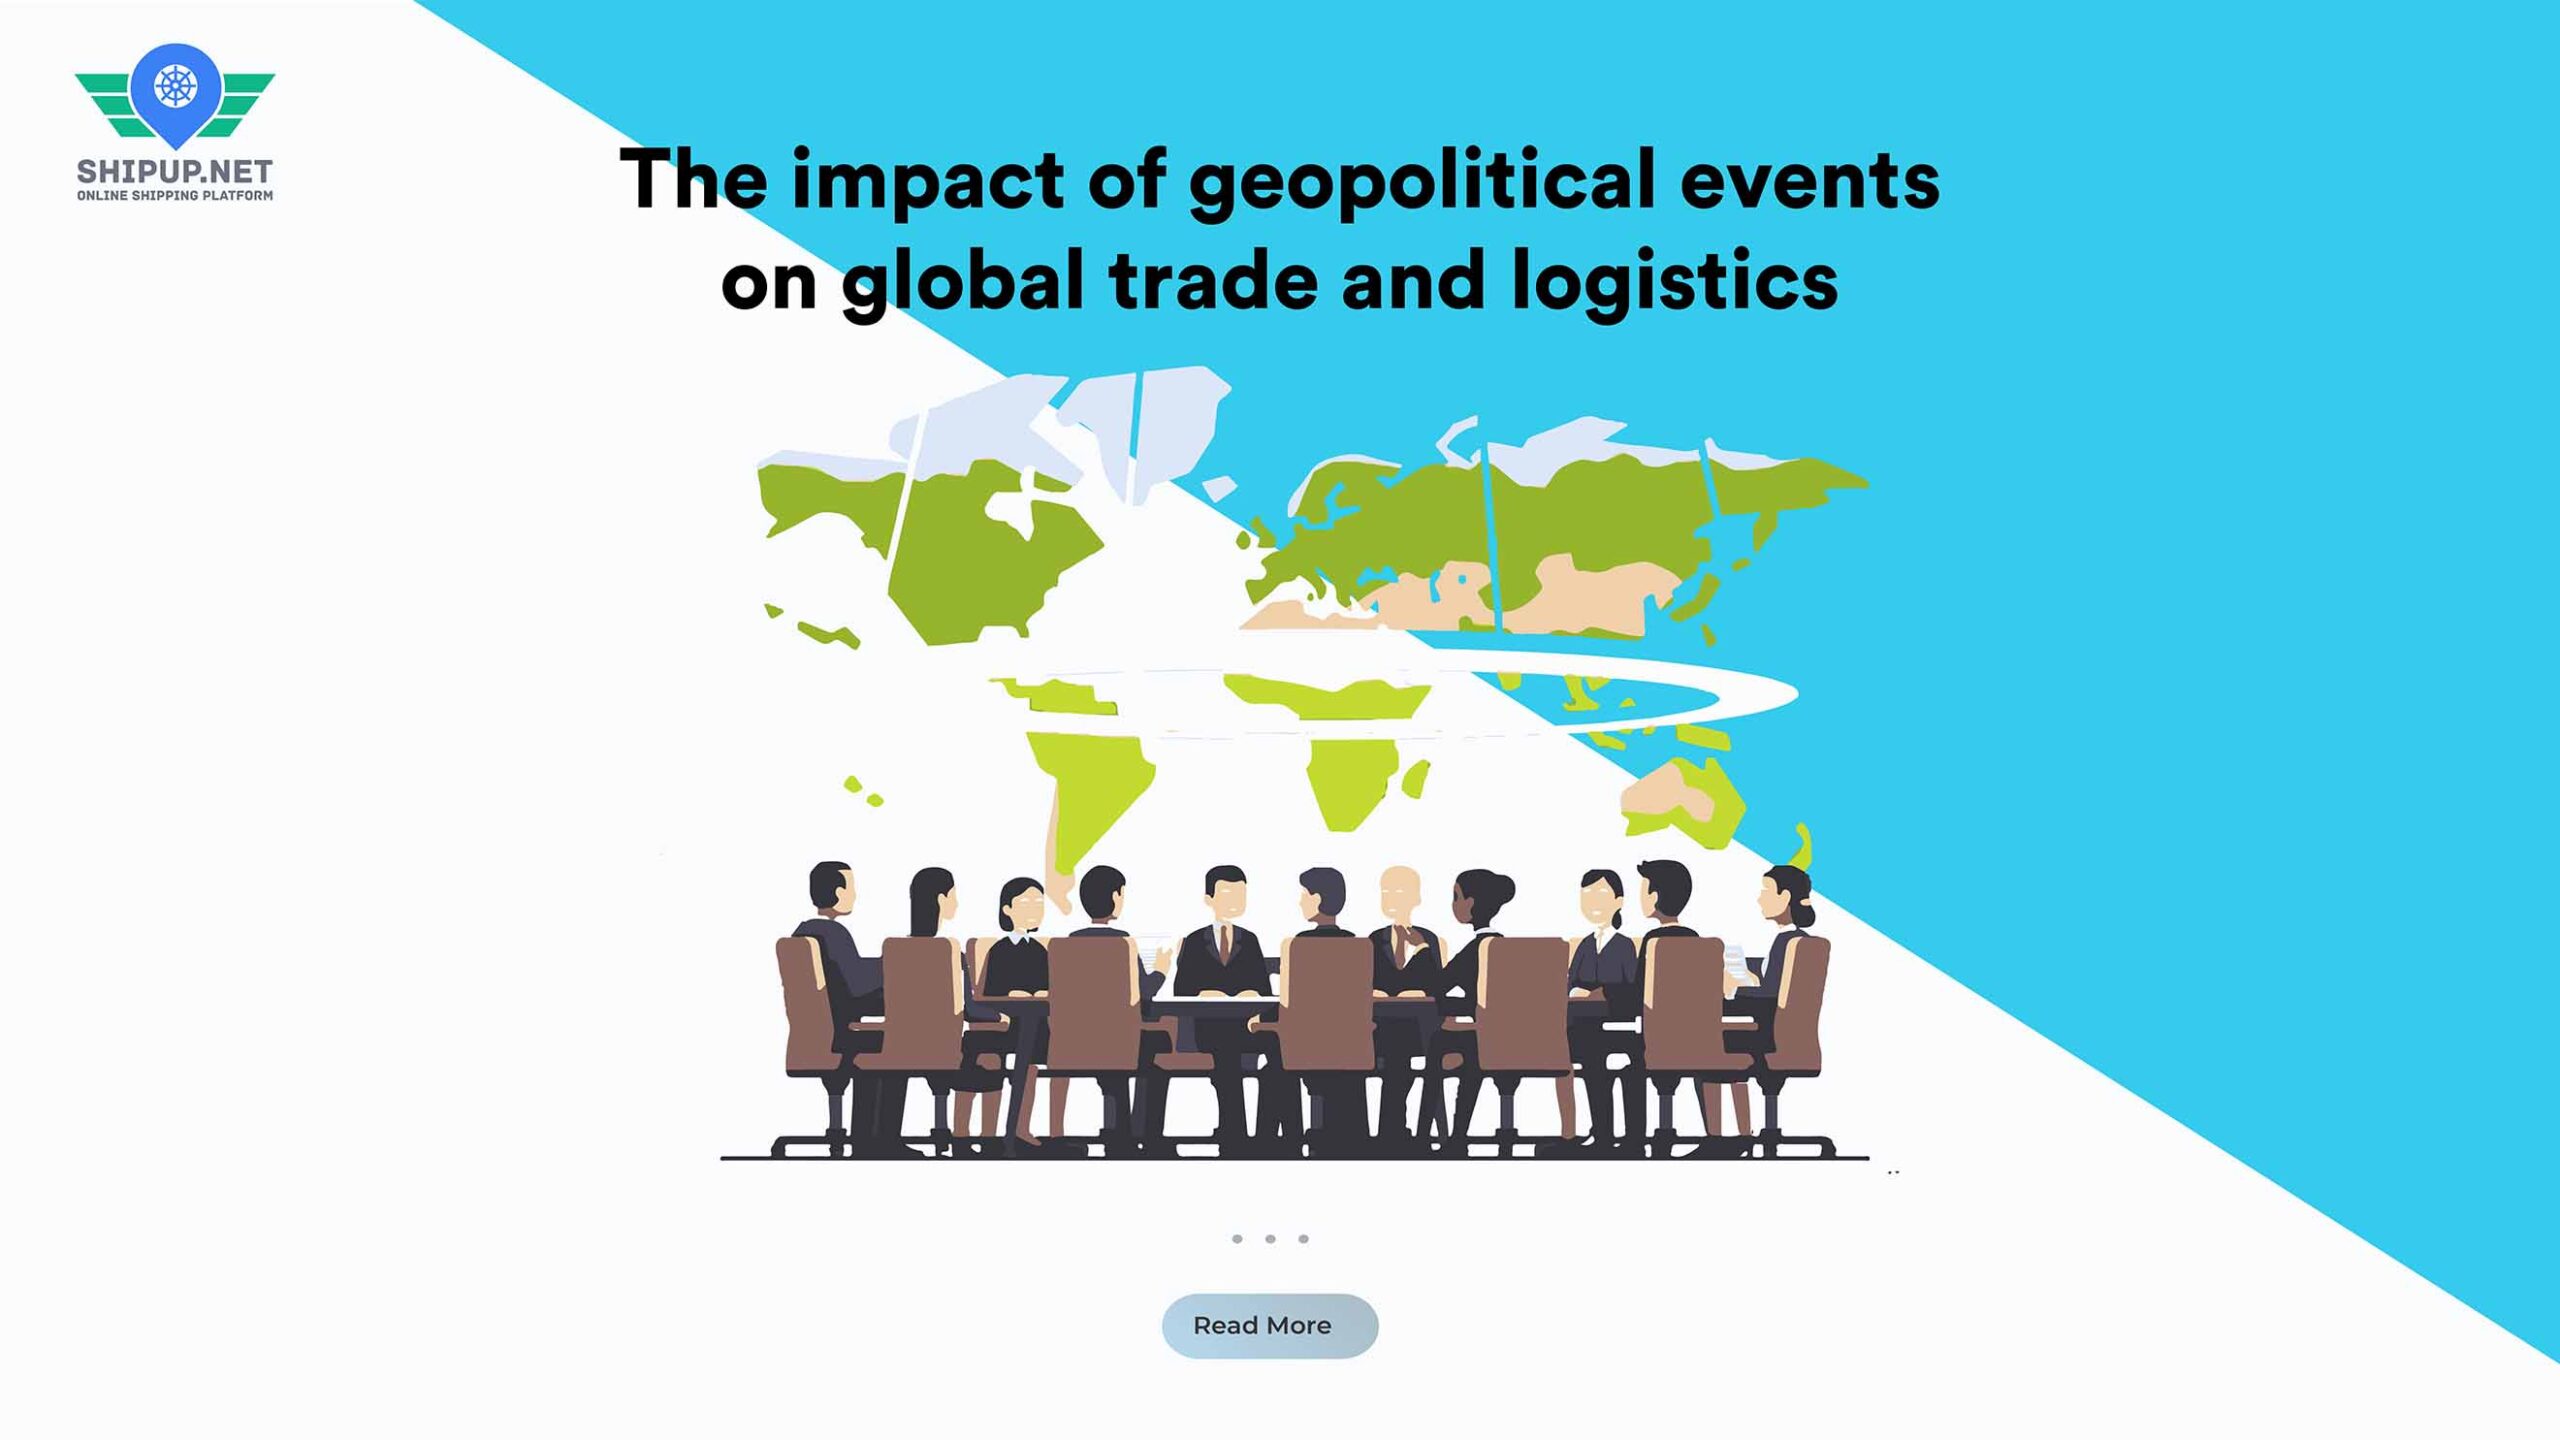 The impact of geopolitical events on global trade and logistics